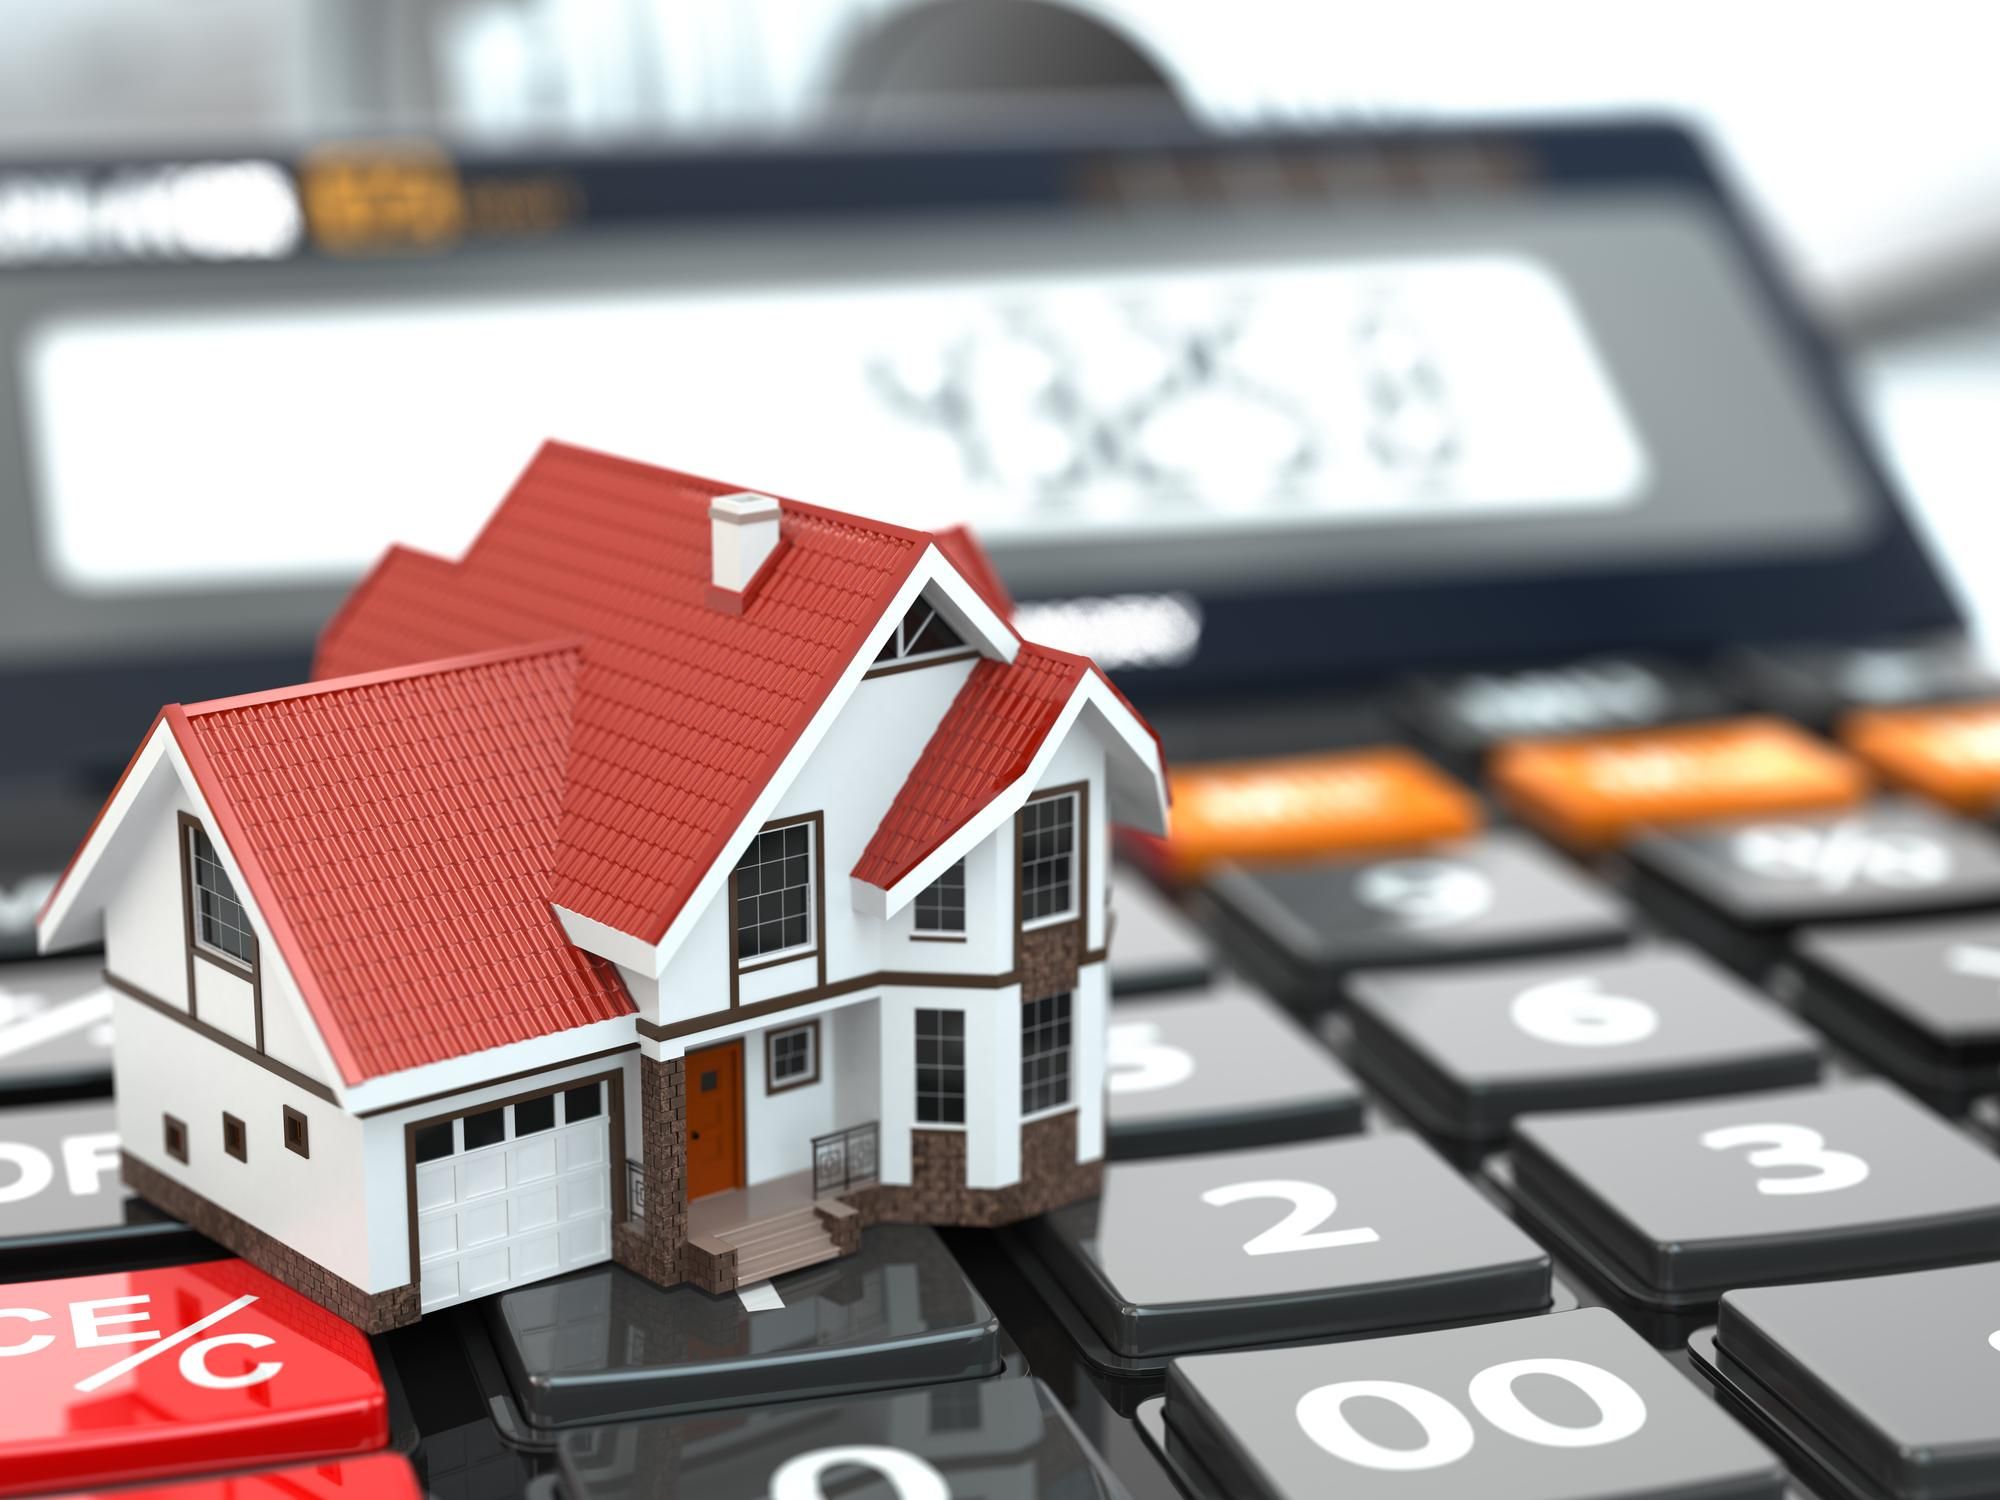 Have you been charged fees when making your mortgage payment by phone?